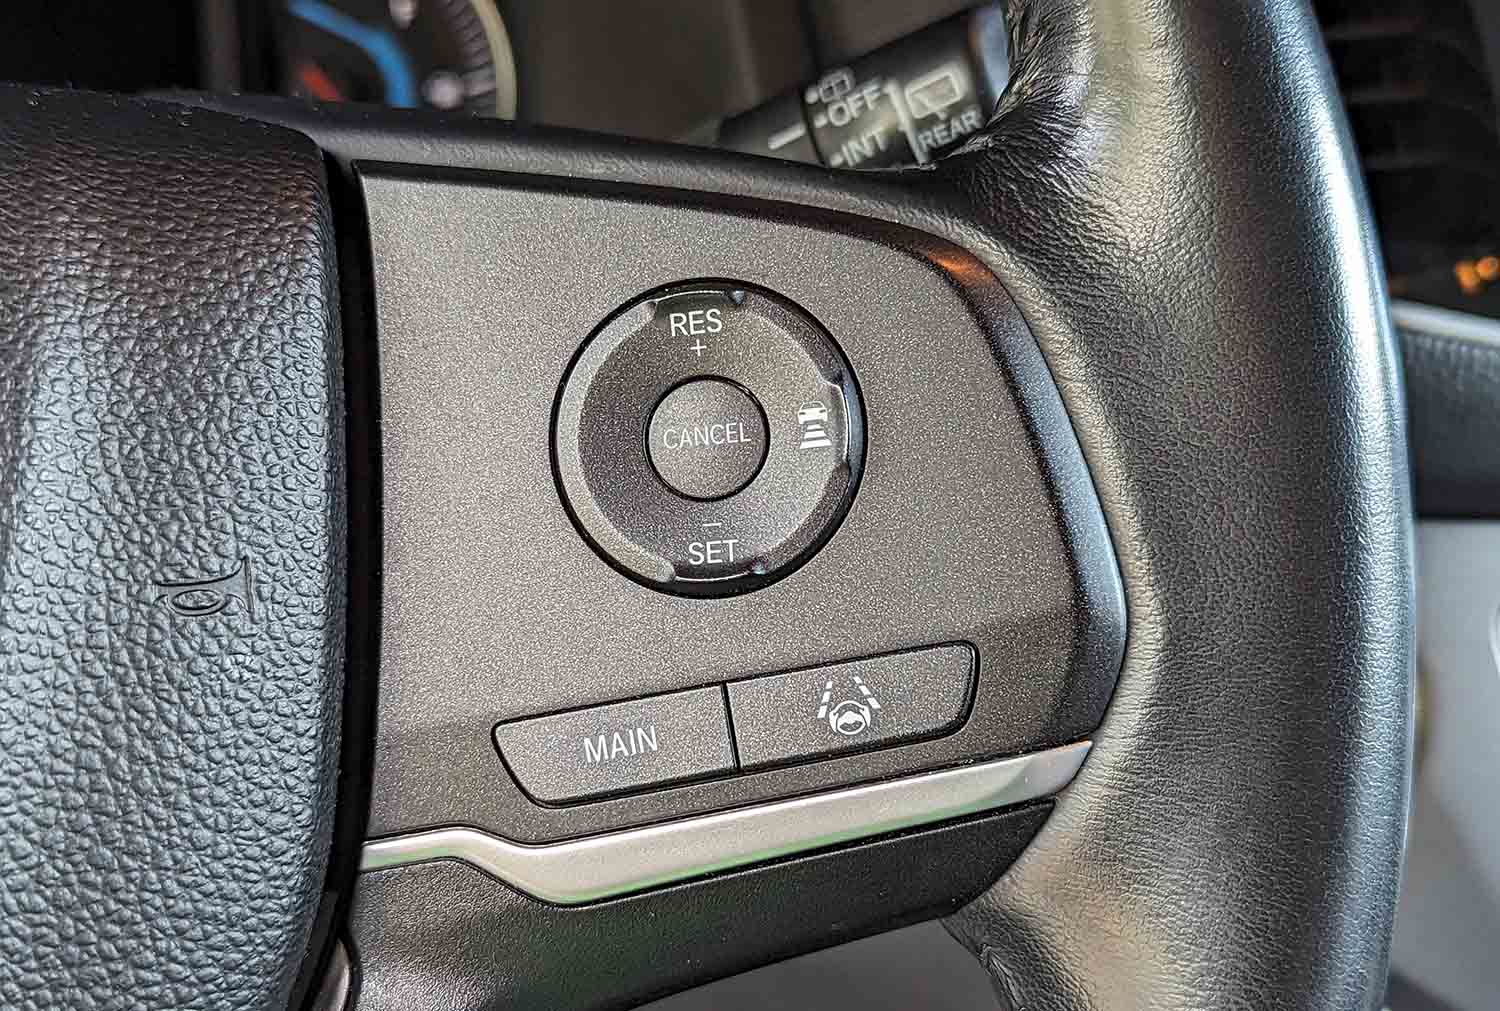  View of advanced driver-assistance system options on steering-wheel controls.